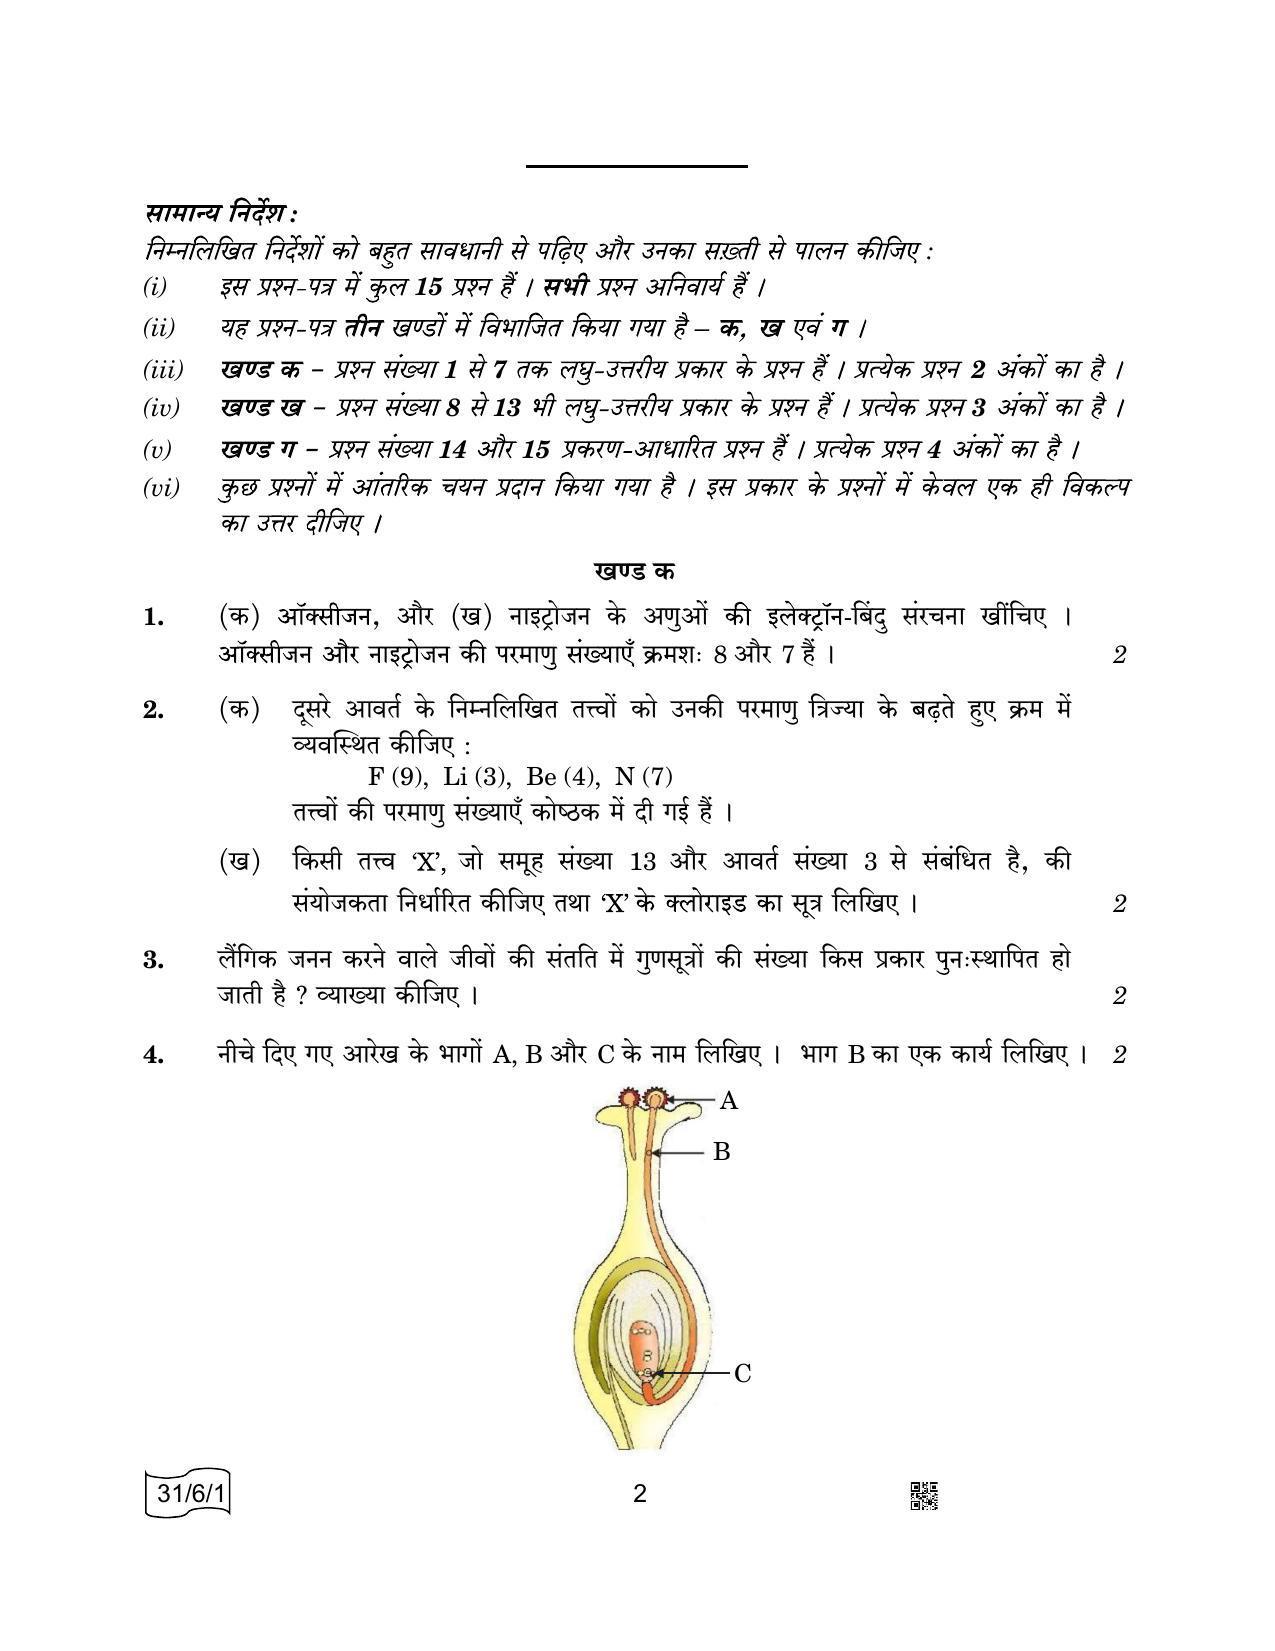 CBSE Class 10 31-6-1 SCIENCE 2022 Compartment Question Paper - Page 2